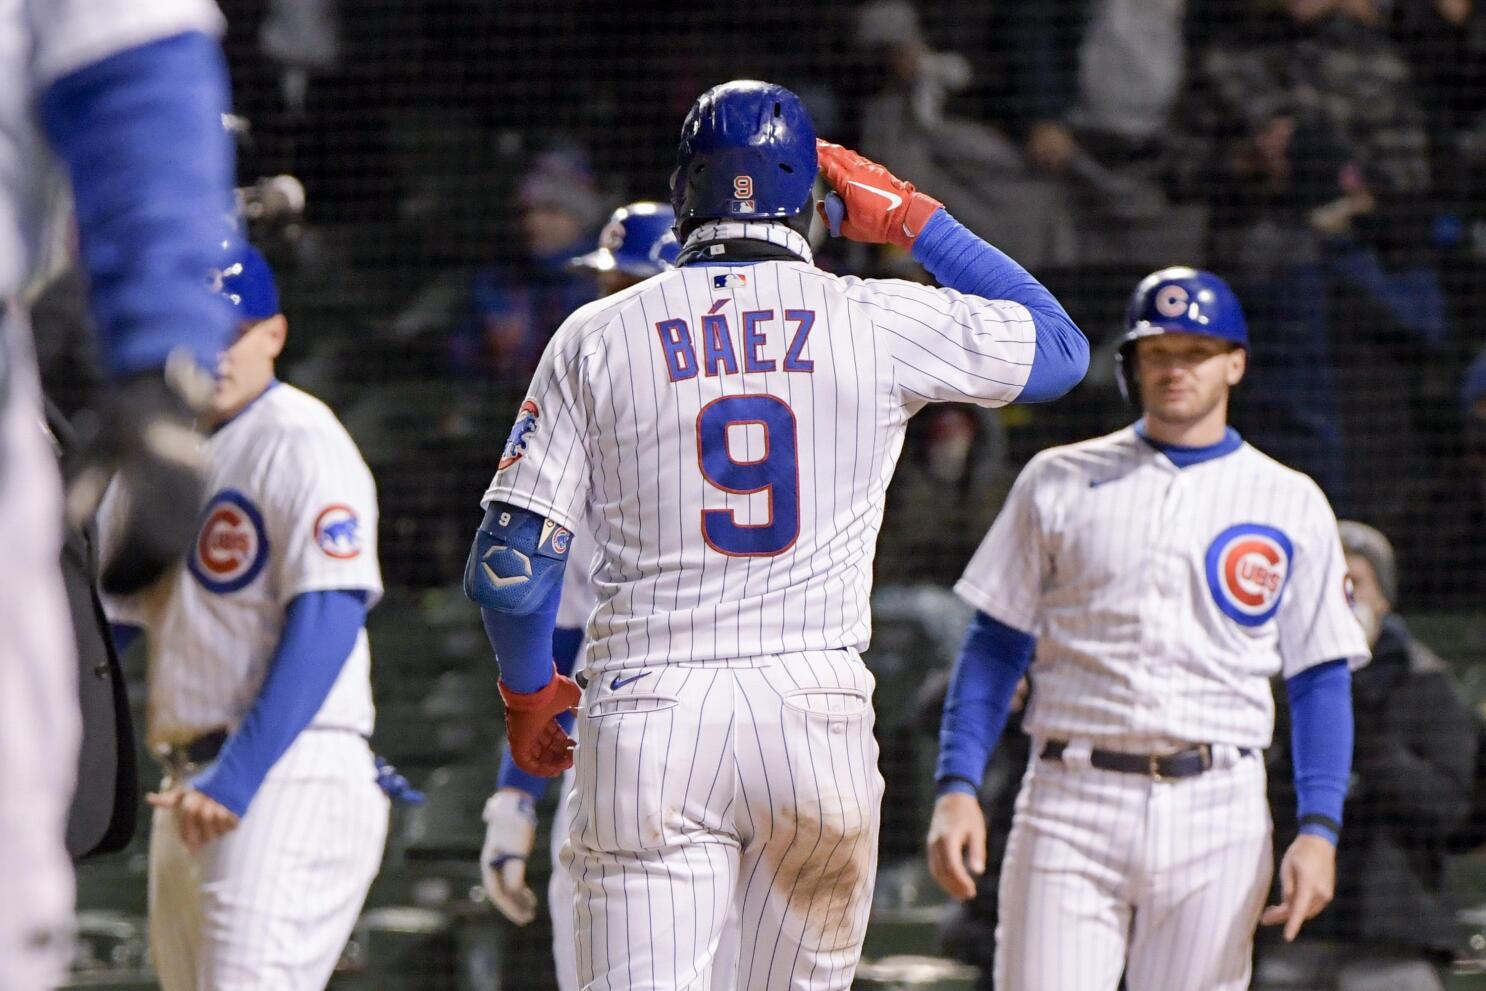 Javier Baez almost has first altercation as a Met